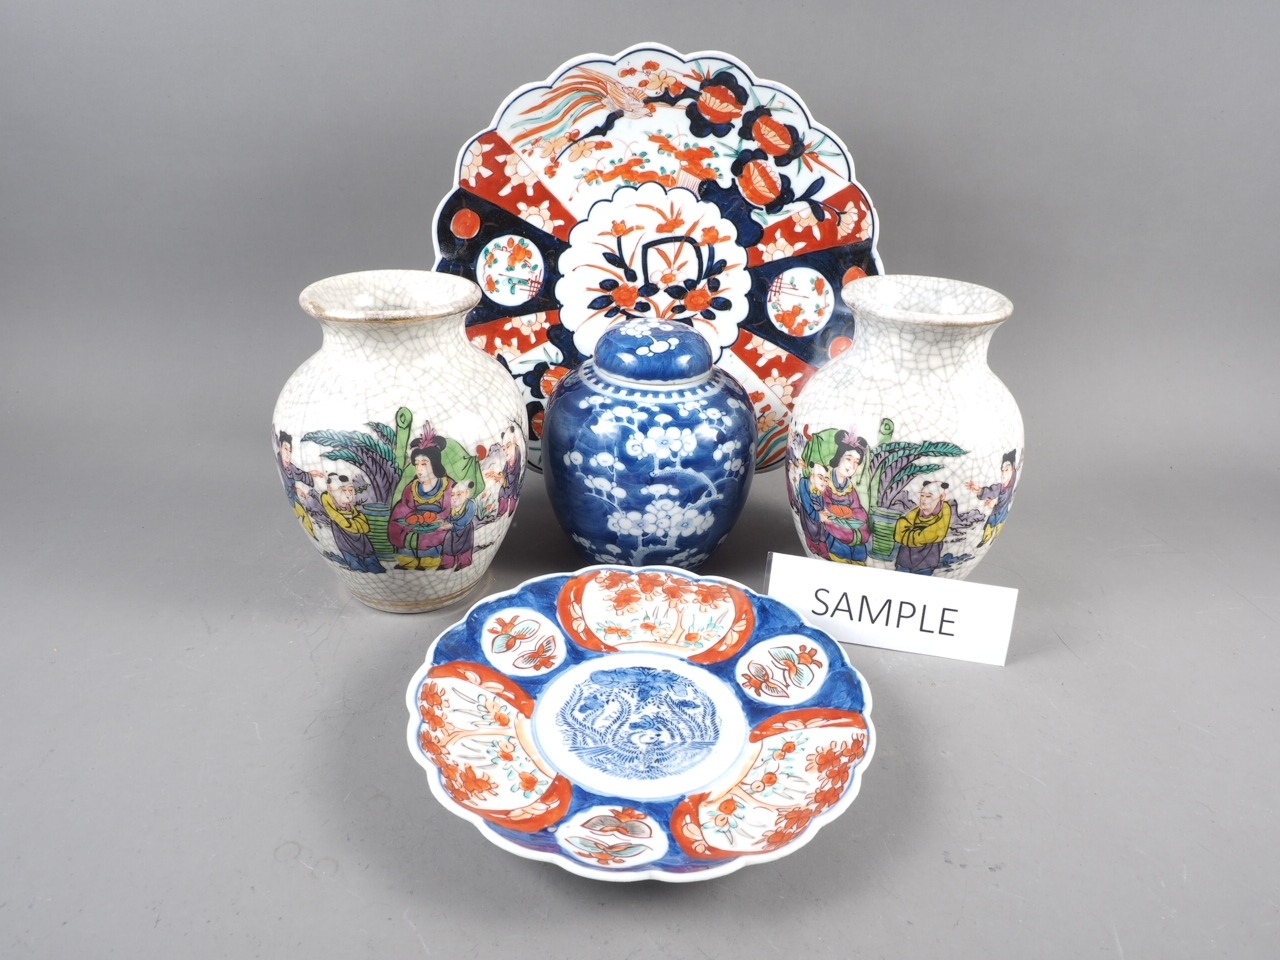 A pair of Chinese crackle ware vases with polychrome decoration, two Imari plates and other Oriental